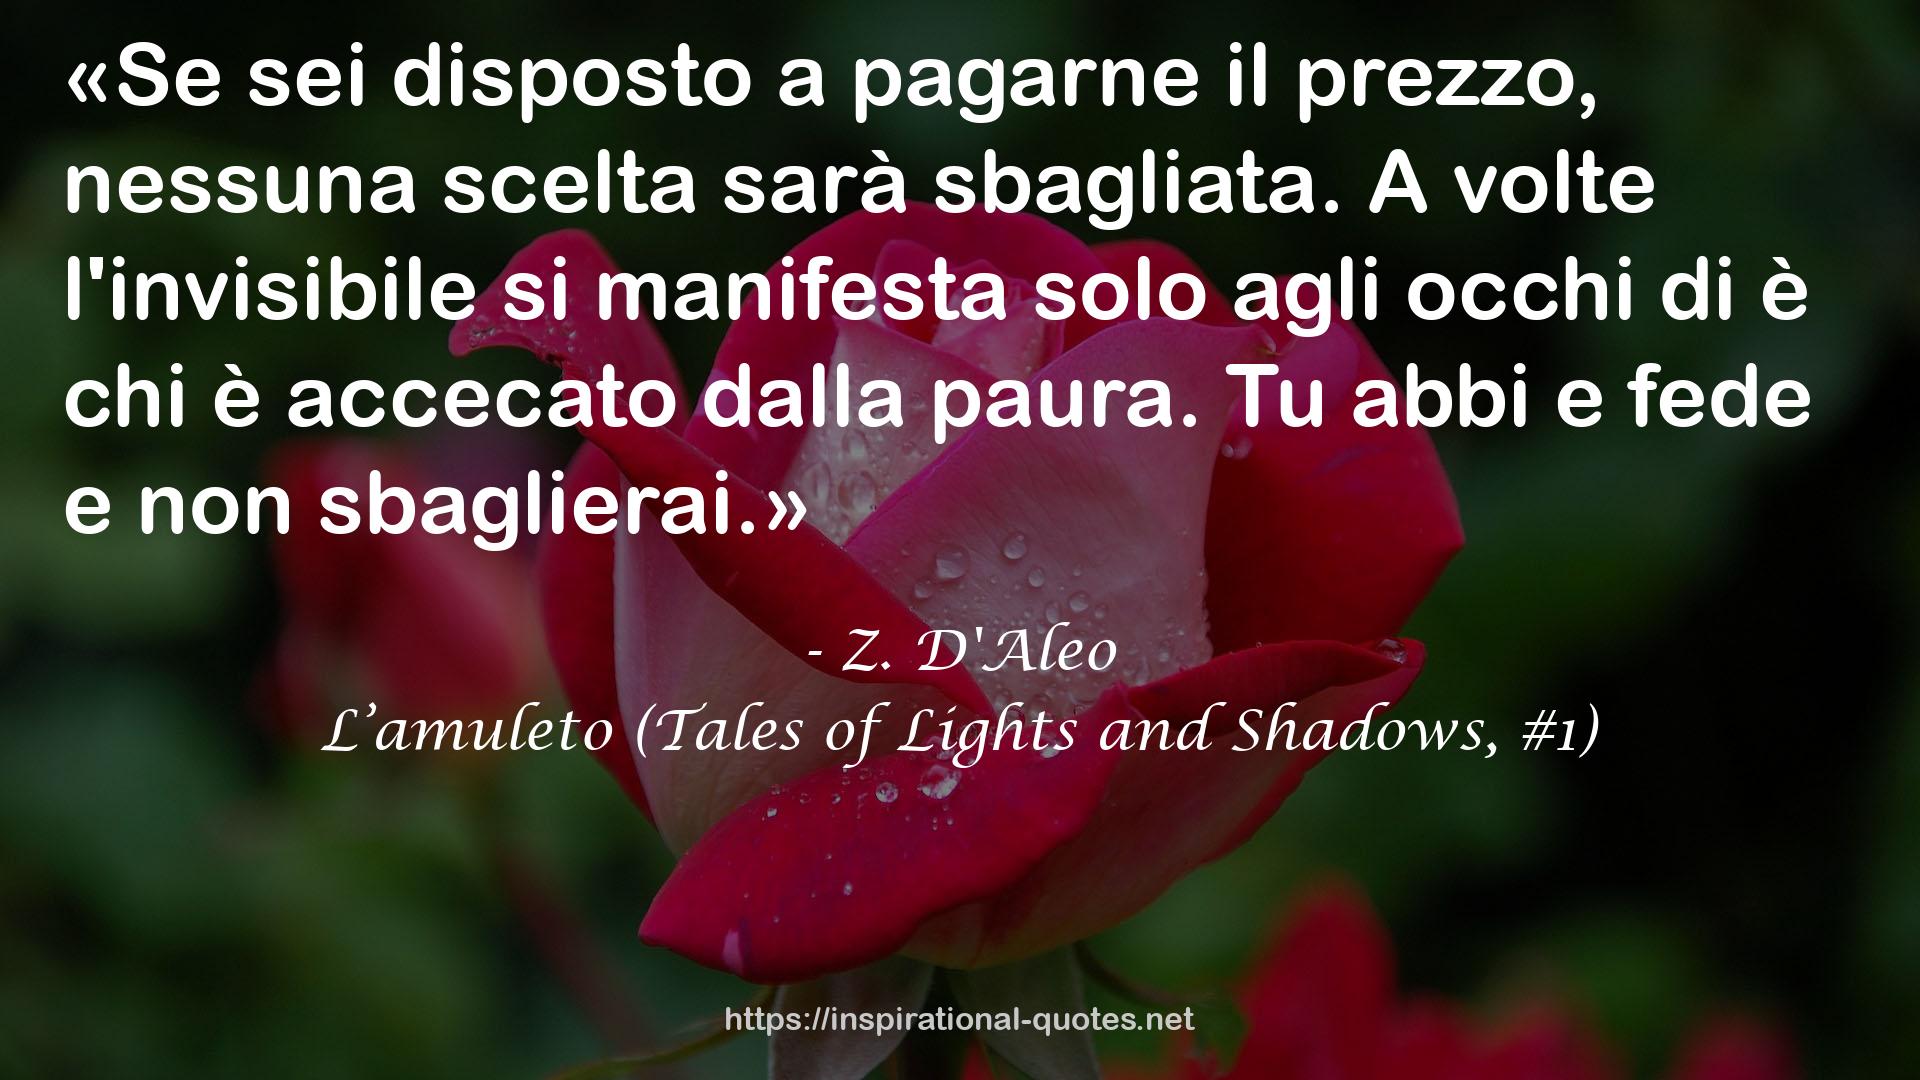 L’amuleto (Tales of Lights and Shadows, #1) QUOTES